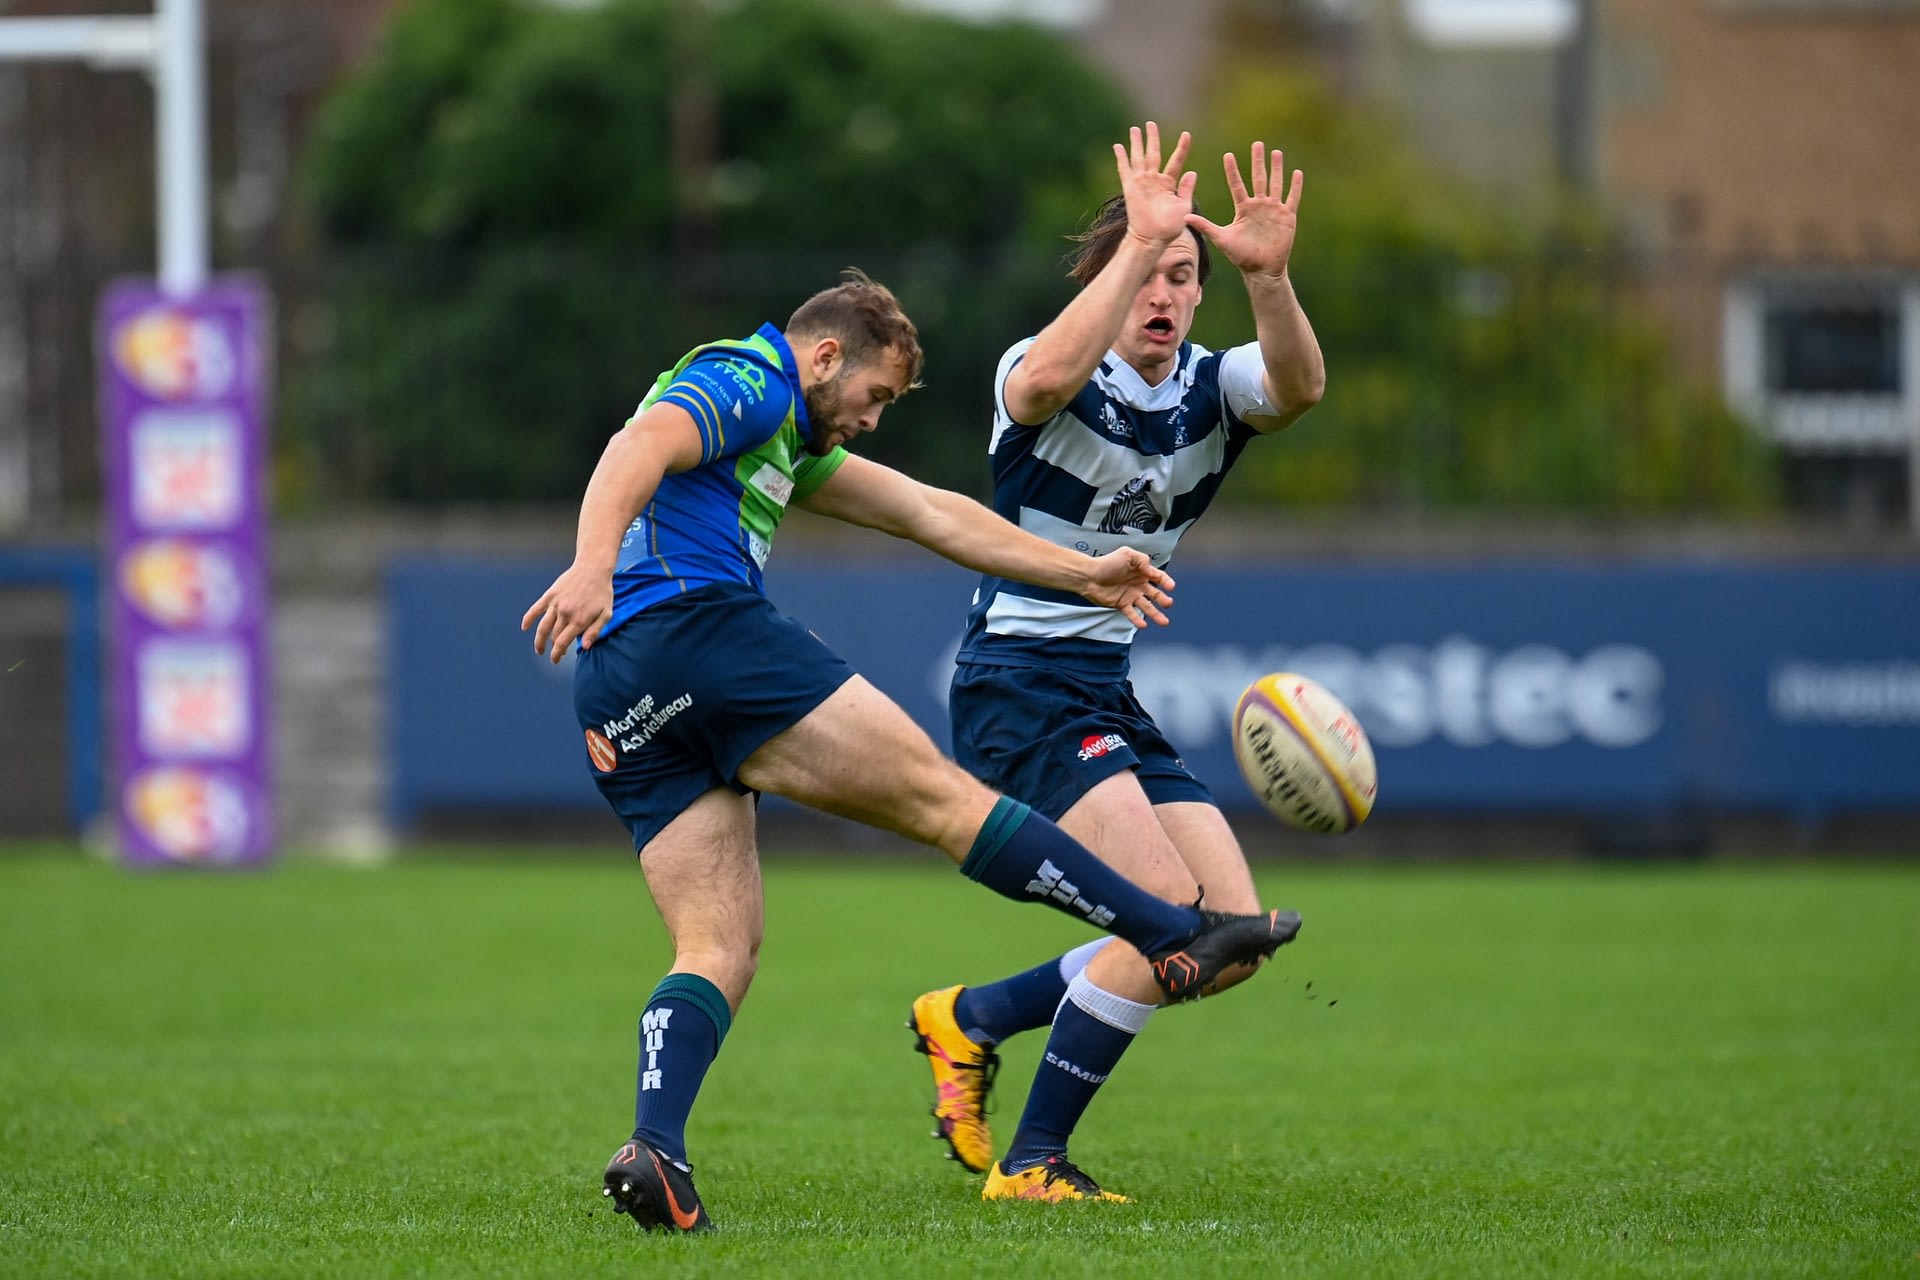 Image taken during the FOSROC Super6 rugby match between Heriot’s Rugby and Boroughmuir Bears at Goldenacre, Edinburgh, Scotland on 16 October 2021.